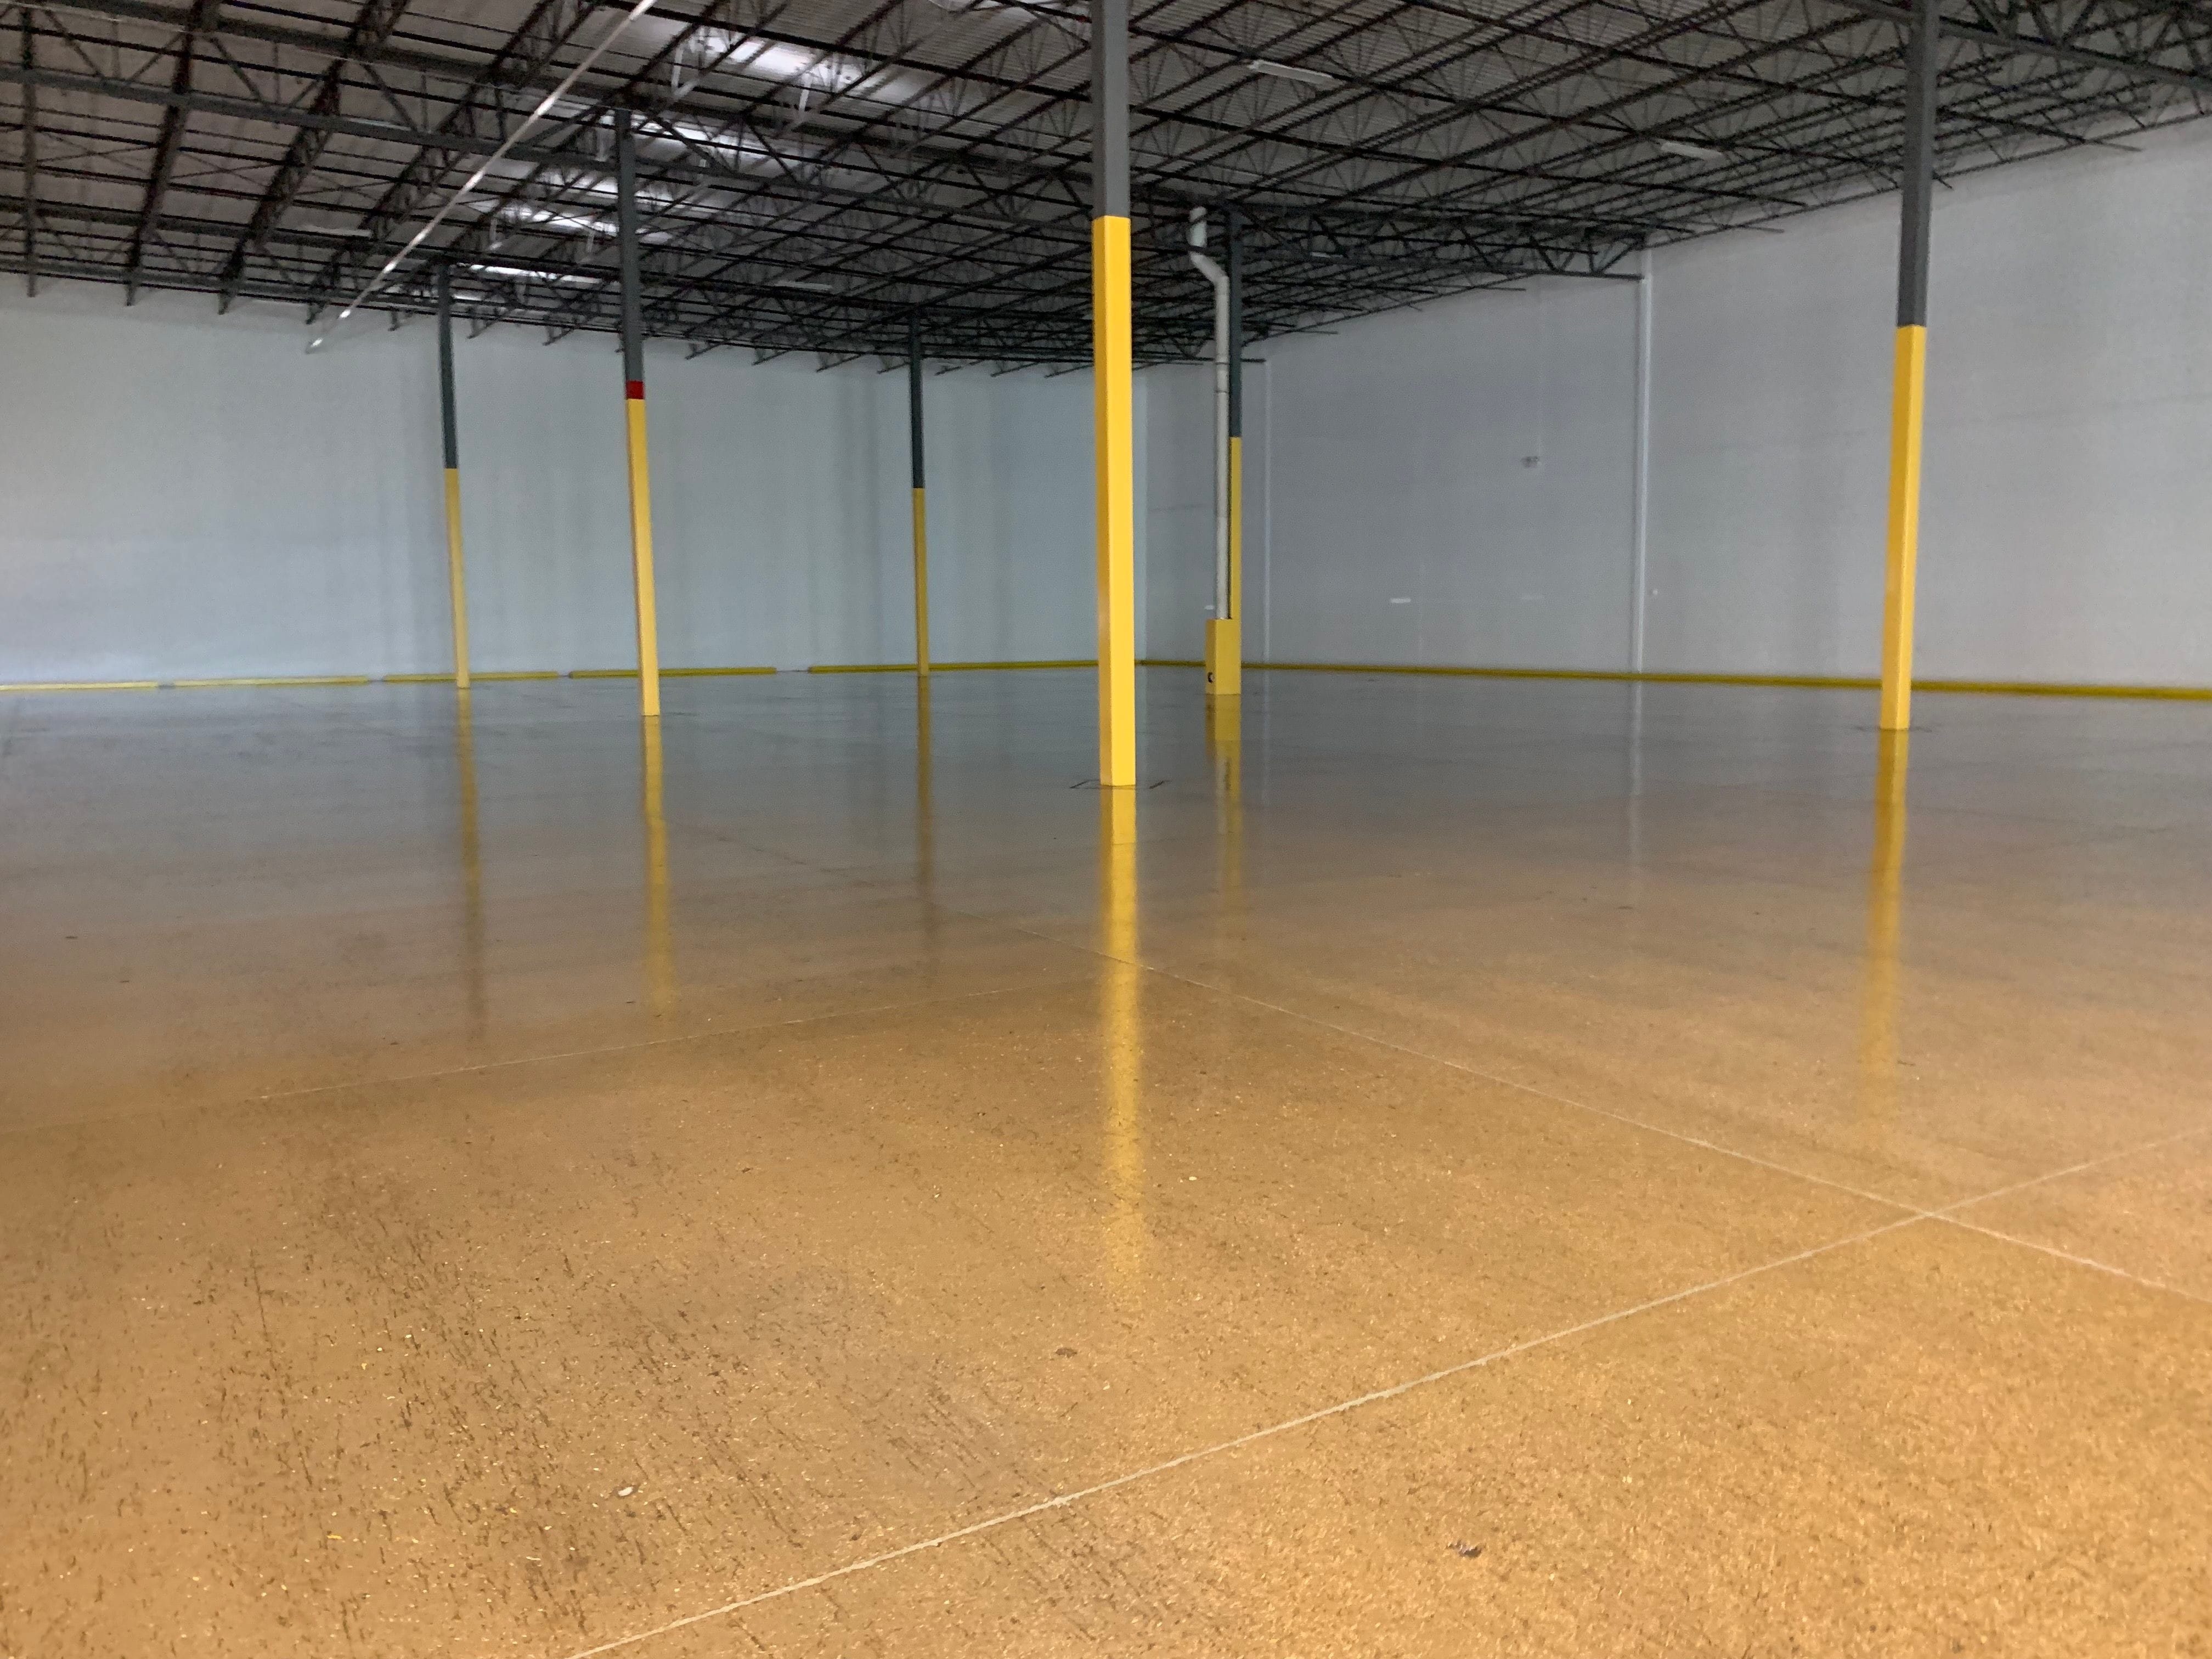 urethane floor coating in manufacturing environment